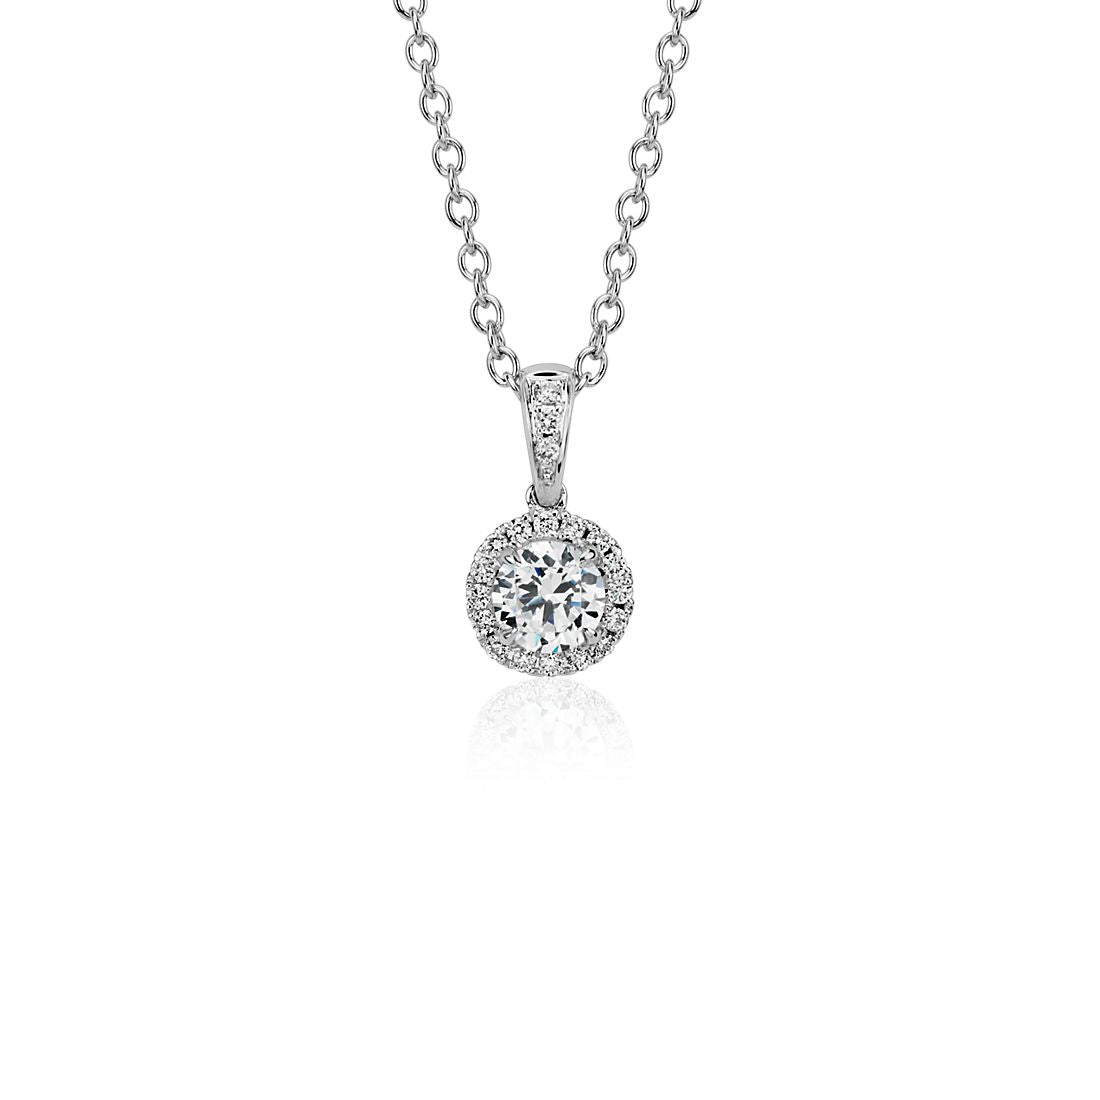 Round 10 CT 925 Sterling Silver Moissanite Necklace